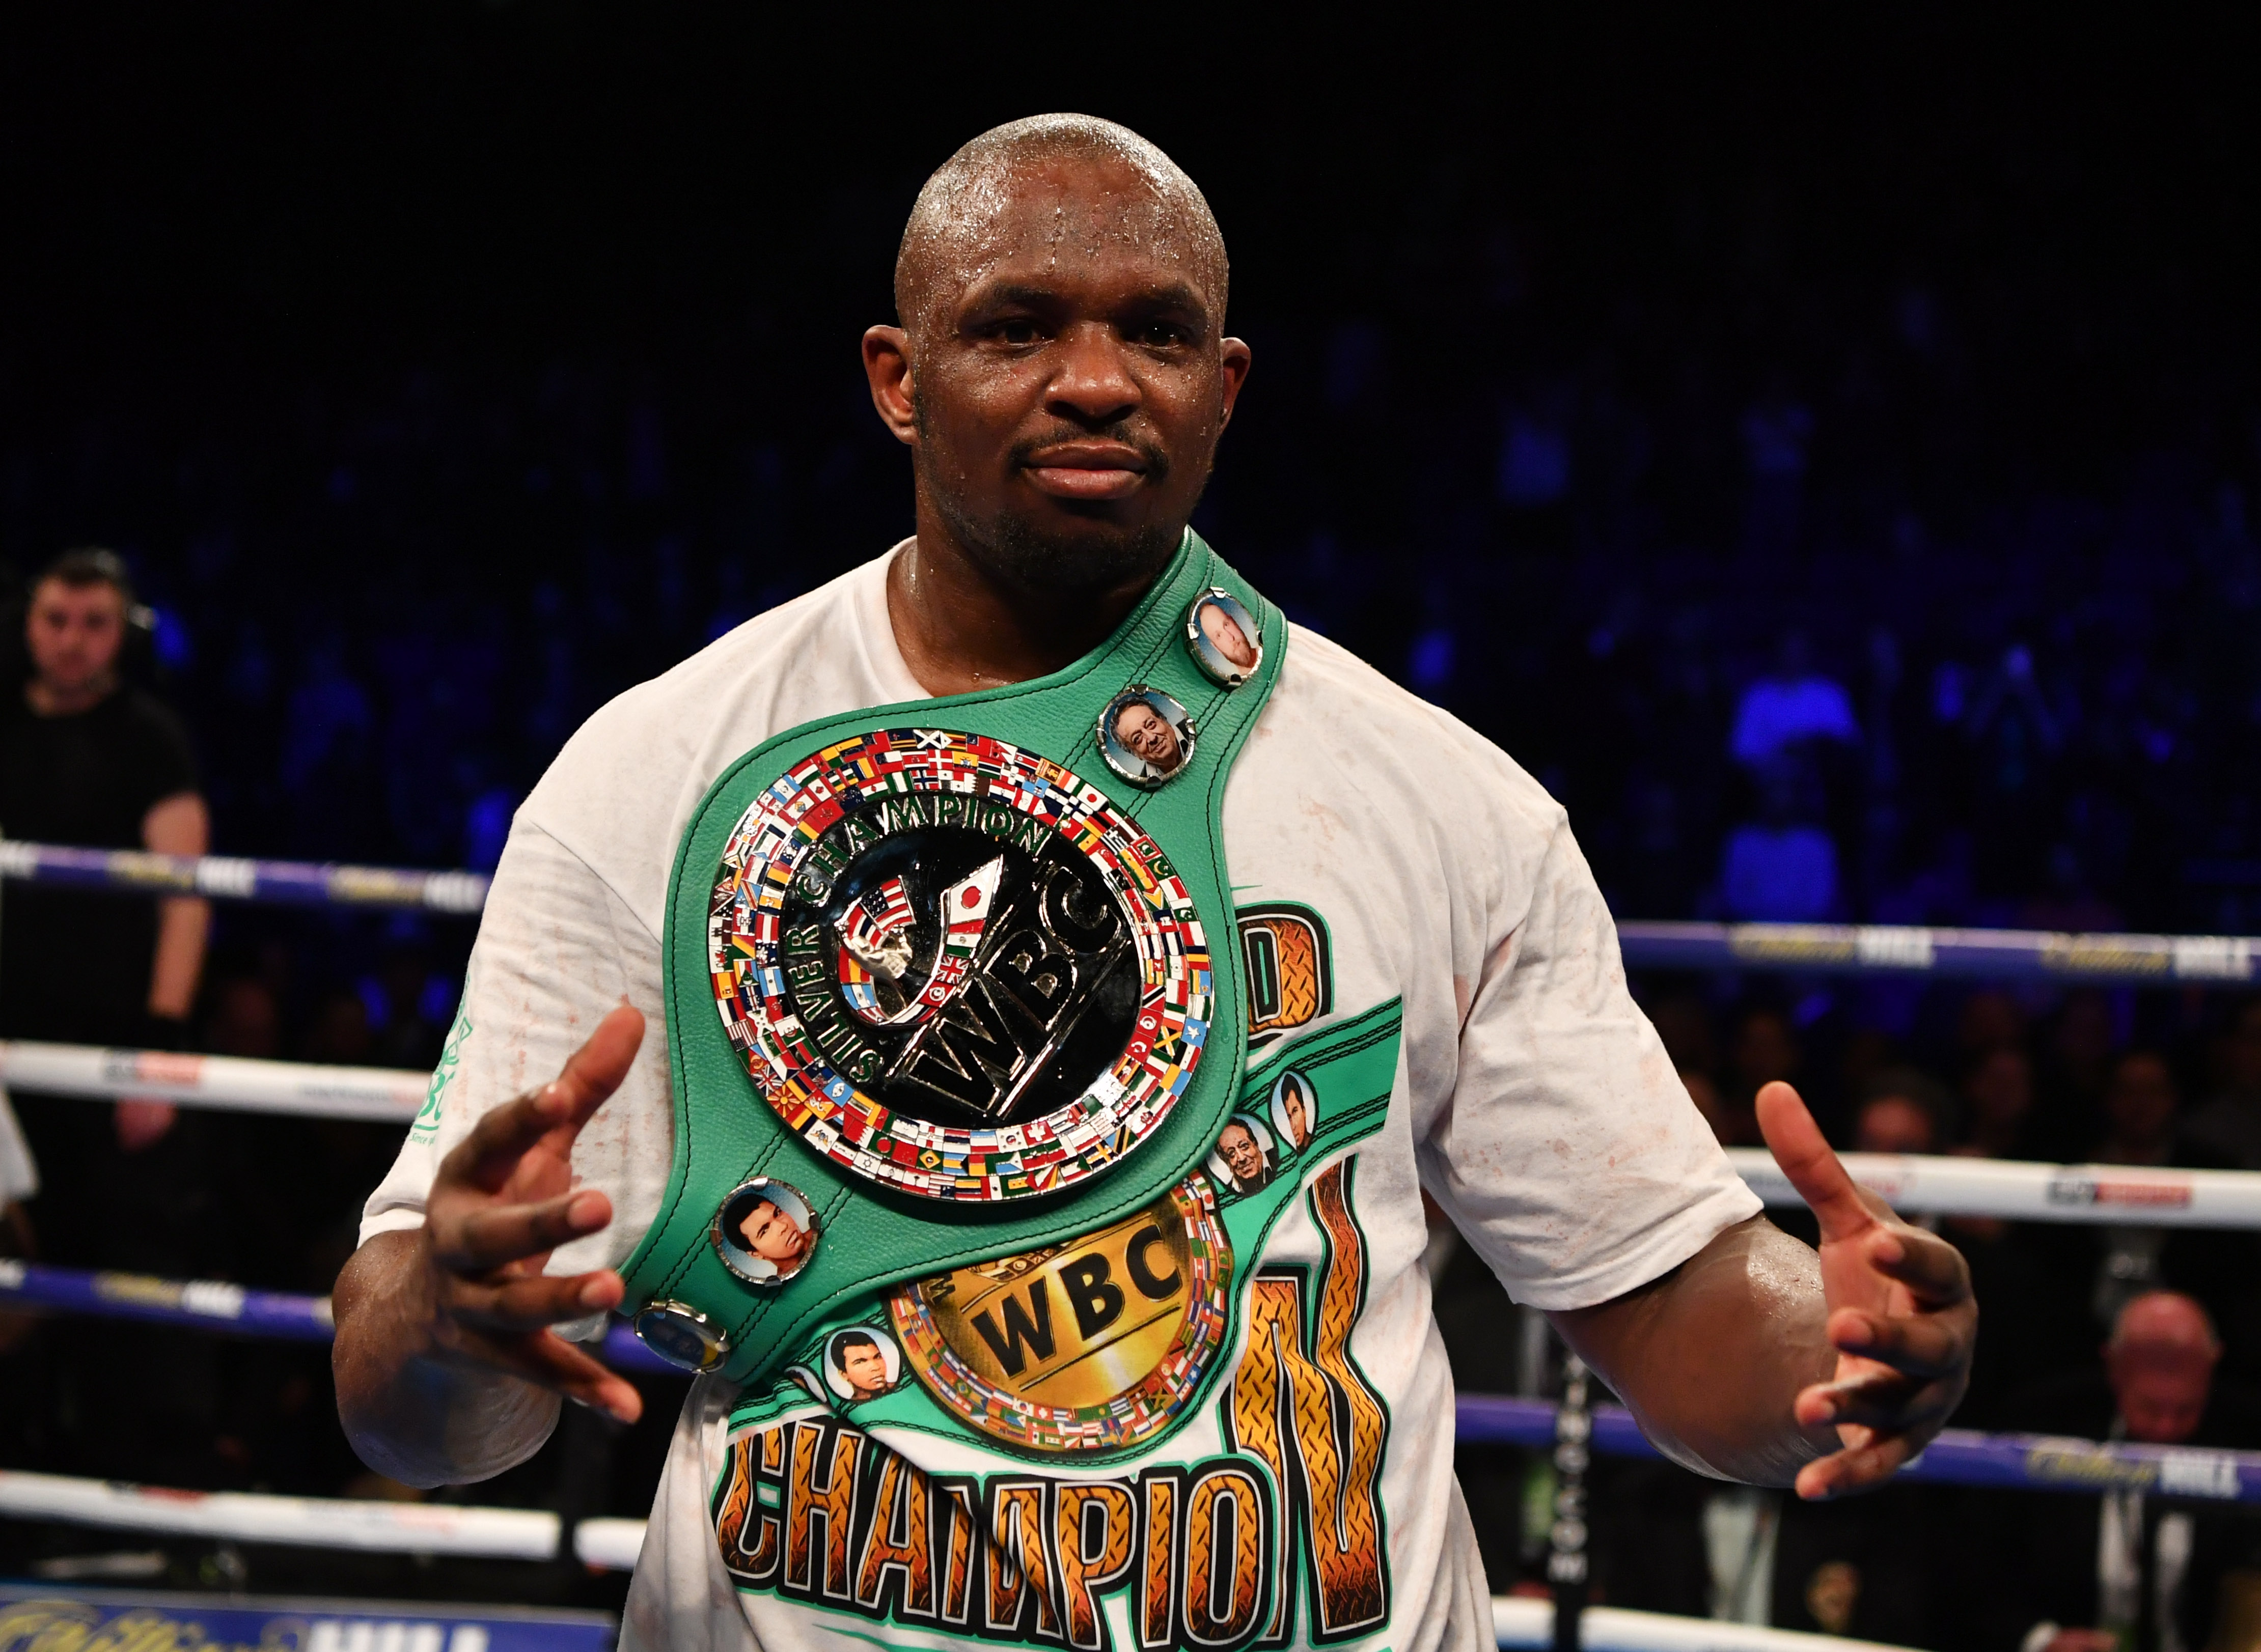 Dillian Whyte: "Tyson Fury has held all the titles but has never made a single defence of any of them." 